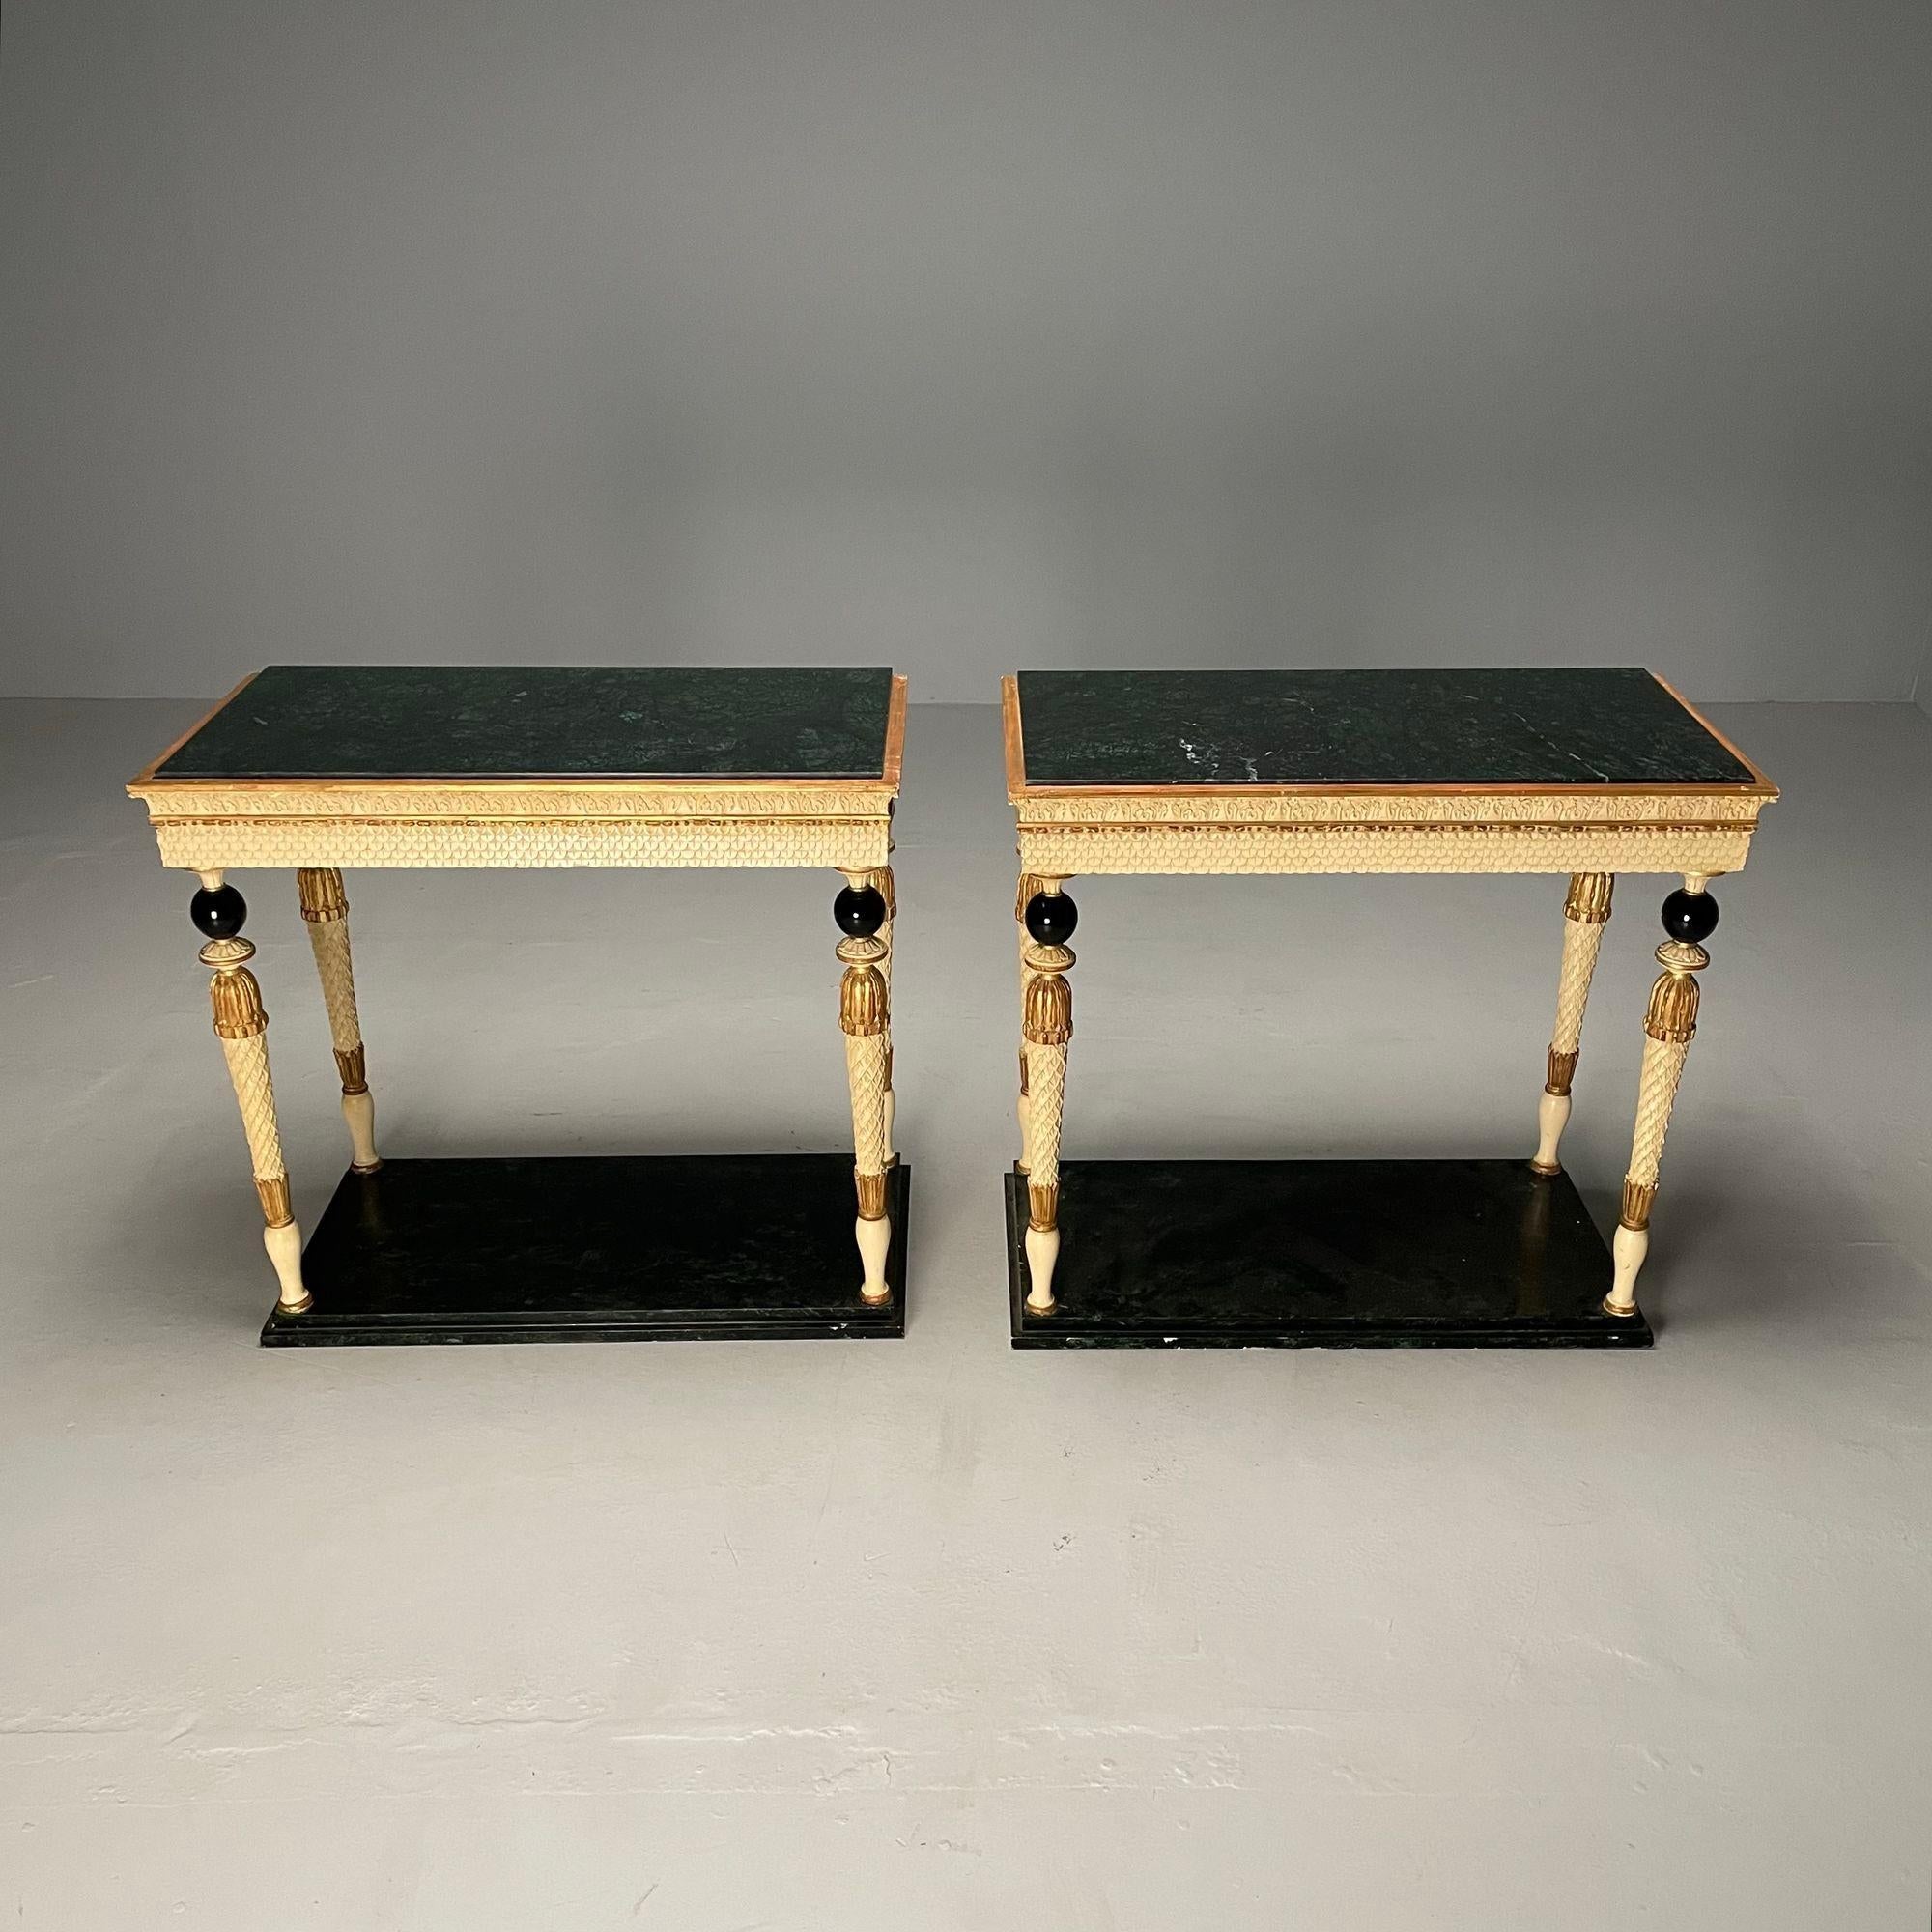 Pair of Swedish Neoclassical Maison Jansen Marble-Top Console Tables, French
A pair of neoclassical style marble-top console tables attributed to Maison Jansen as seen on page 201, of the Jansen Furniture book by James Archer Abbott.
This piece is